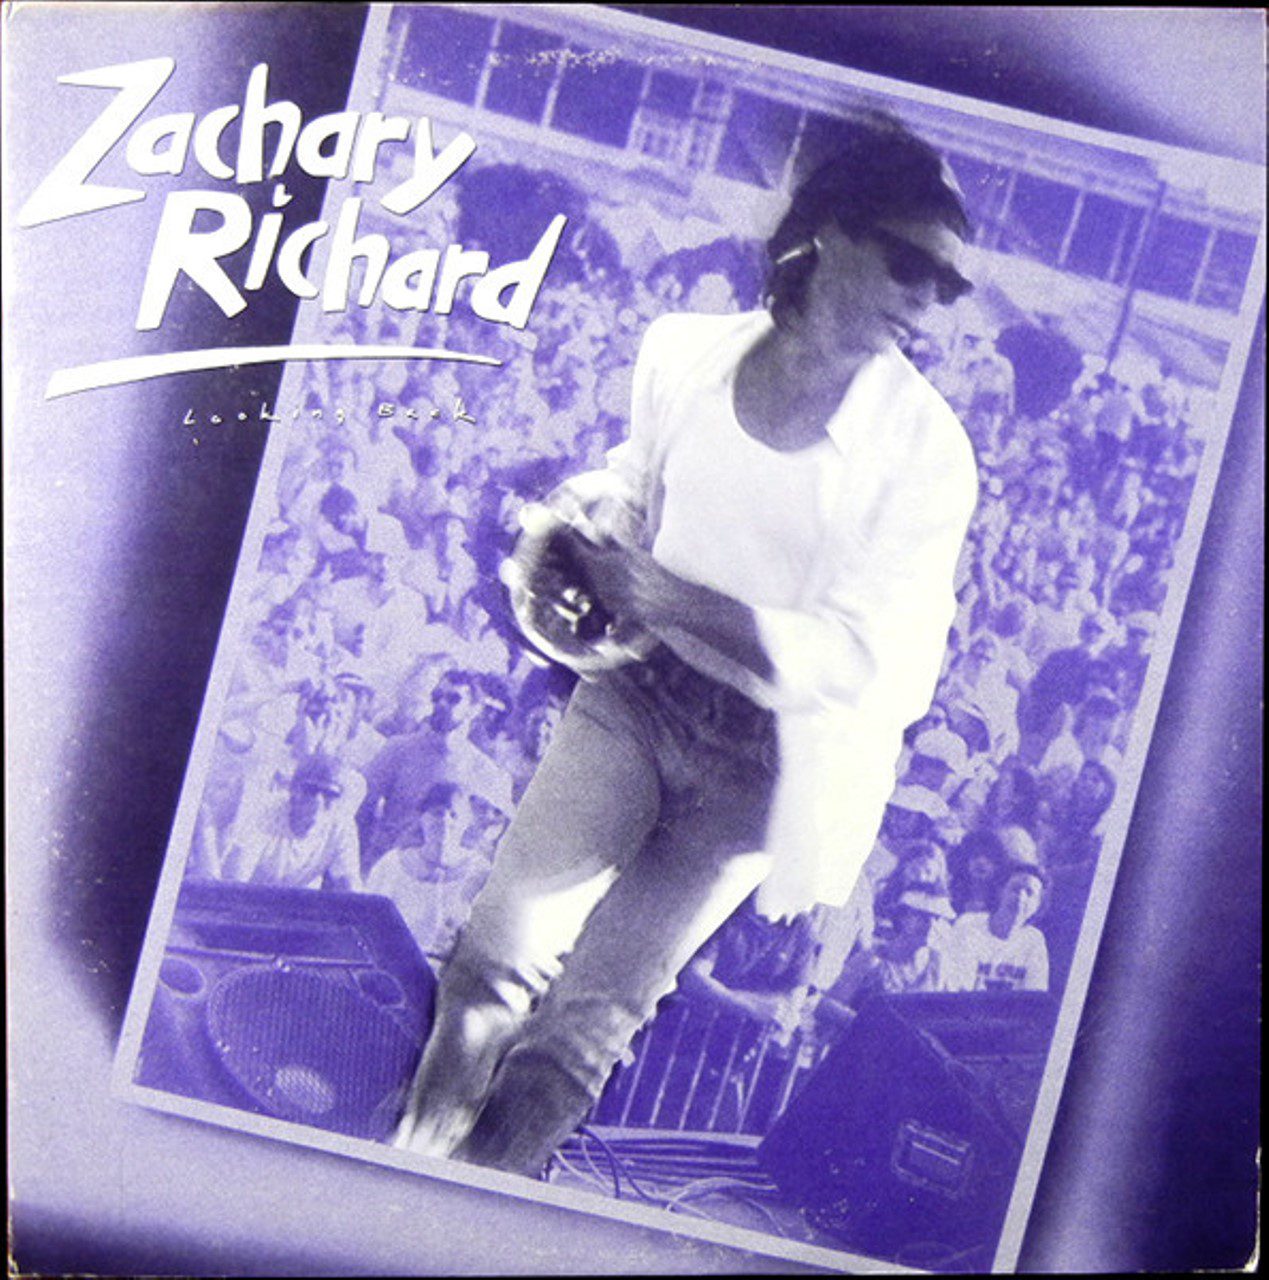 Zachary Richard – Looking Back cover album